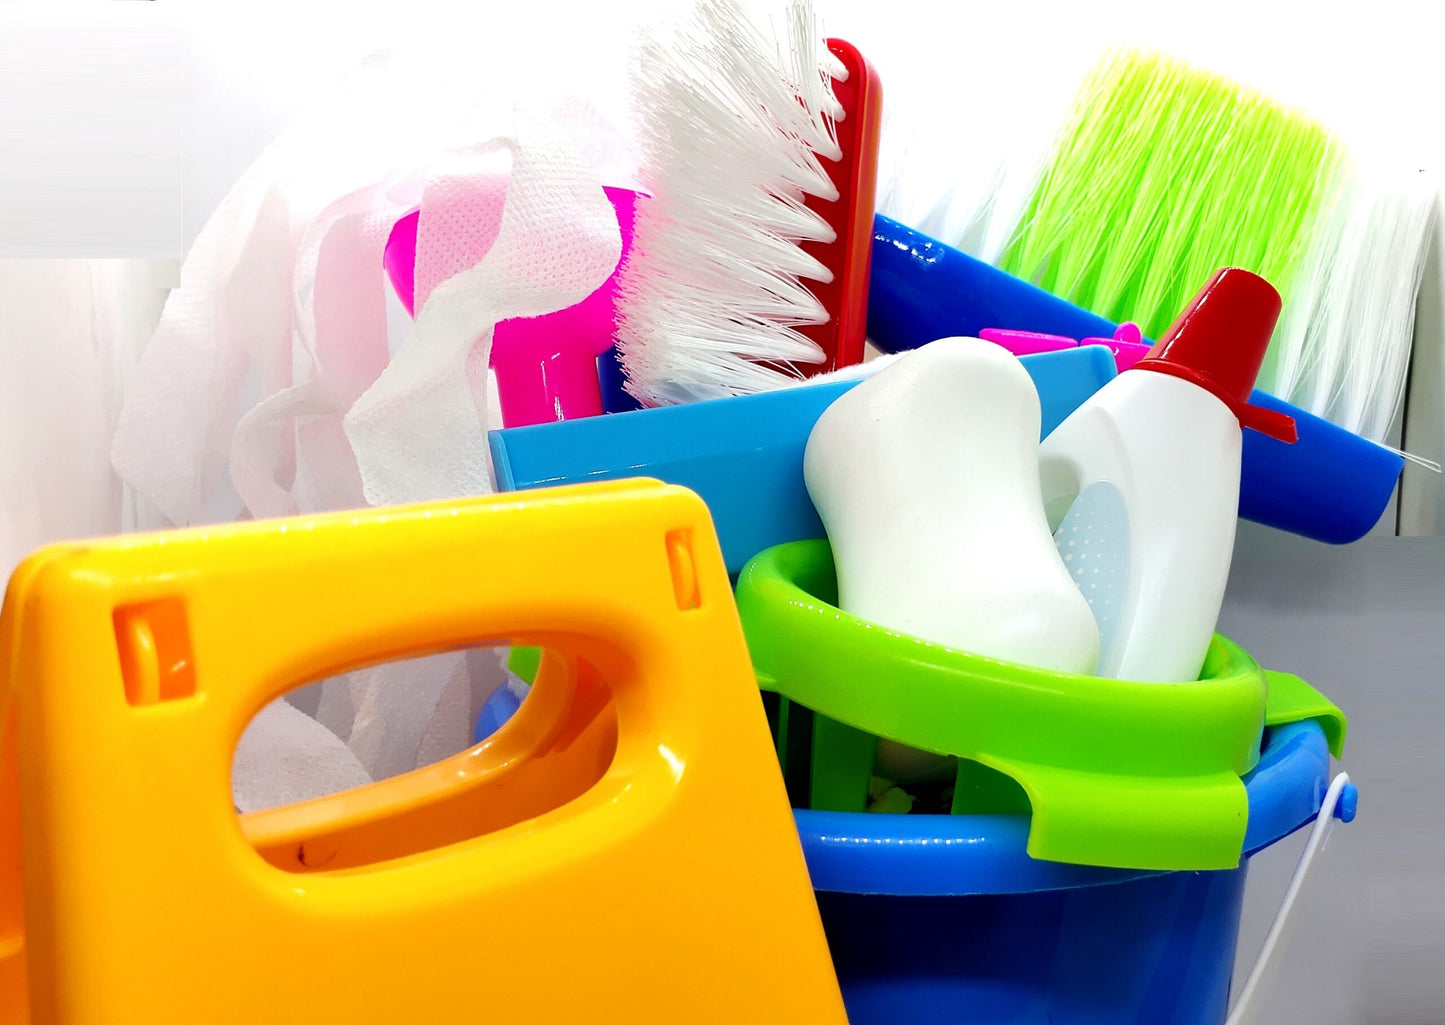 Cleaning Set 11 Piece - Broom, Mop, Brush, Dust Pan, Wiper, Soap Bottle, Soap, Bucket, Caution Sign